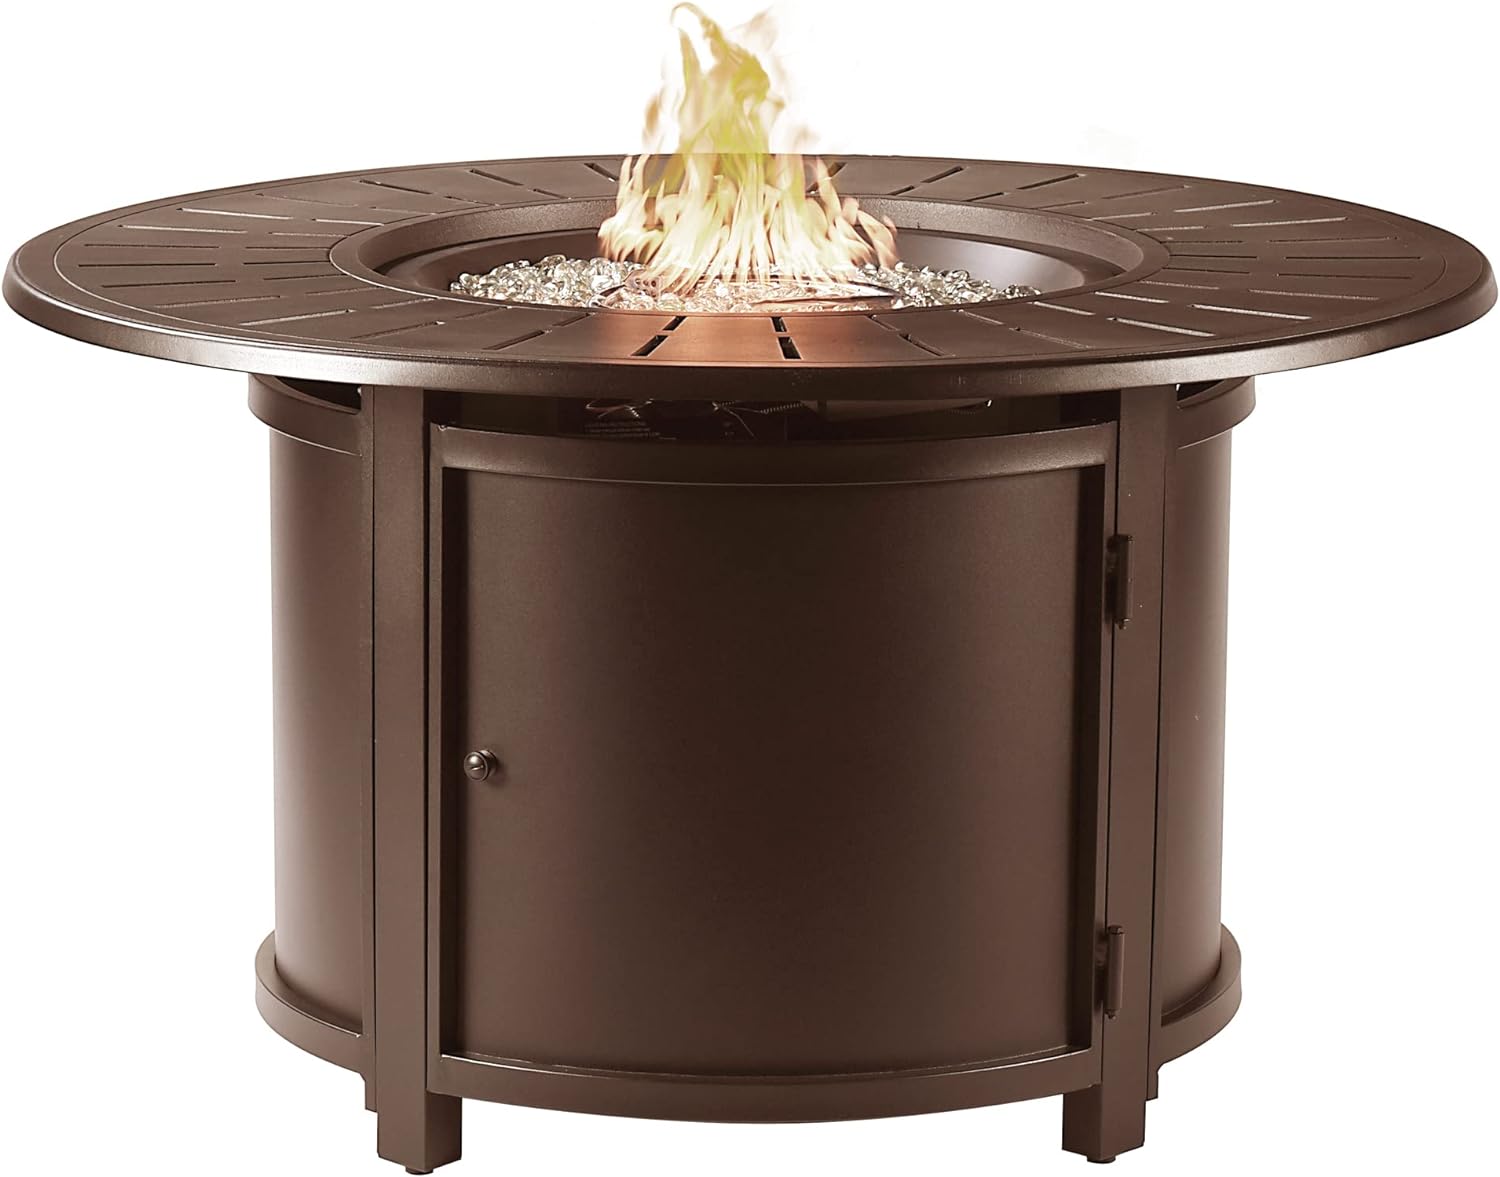 Round 44 in. x 44 in. Aluminum Propane Fire Pit Table with Glass Beads, Two Covers, Lid, 57,000 BTUs in Brown Finish